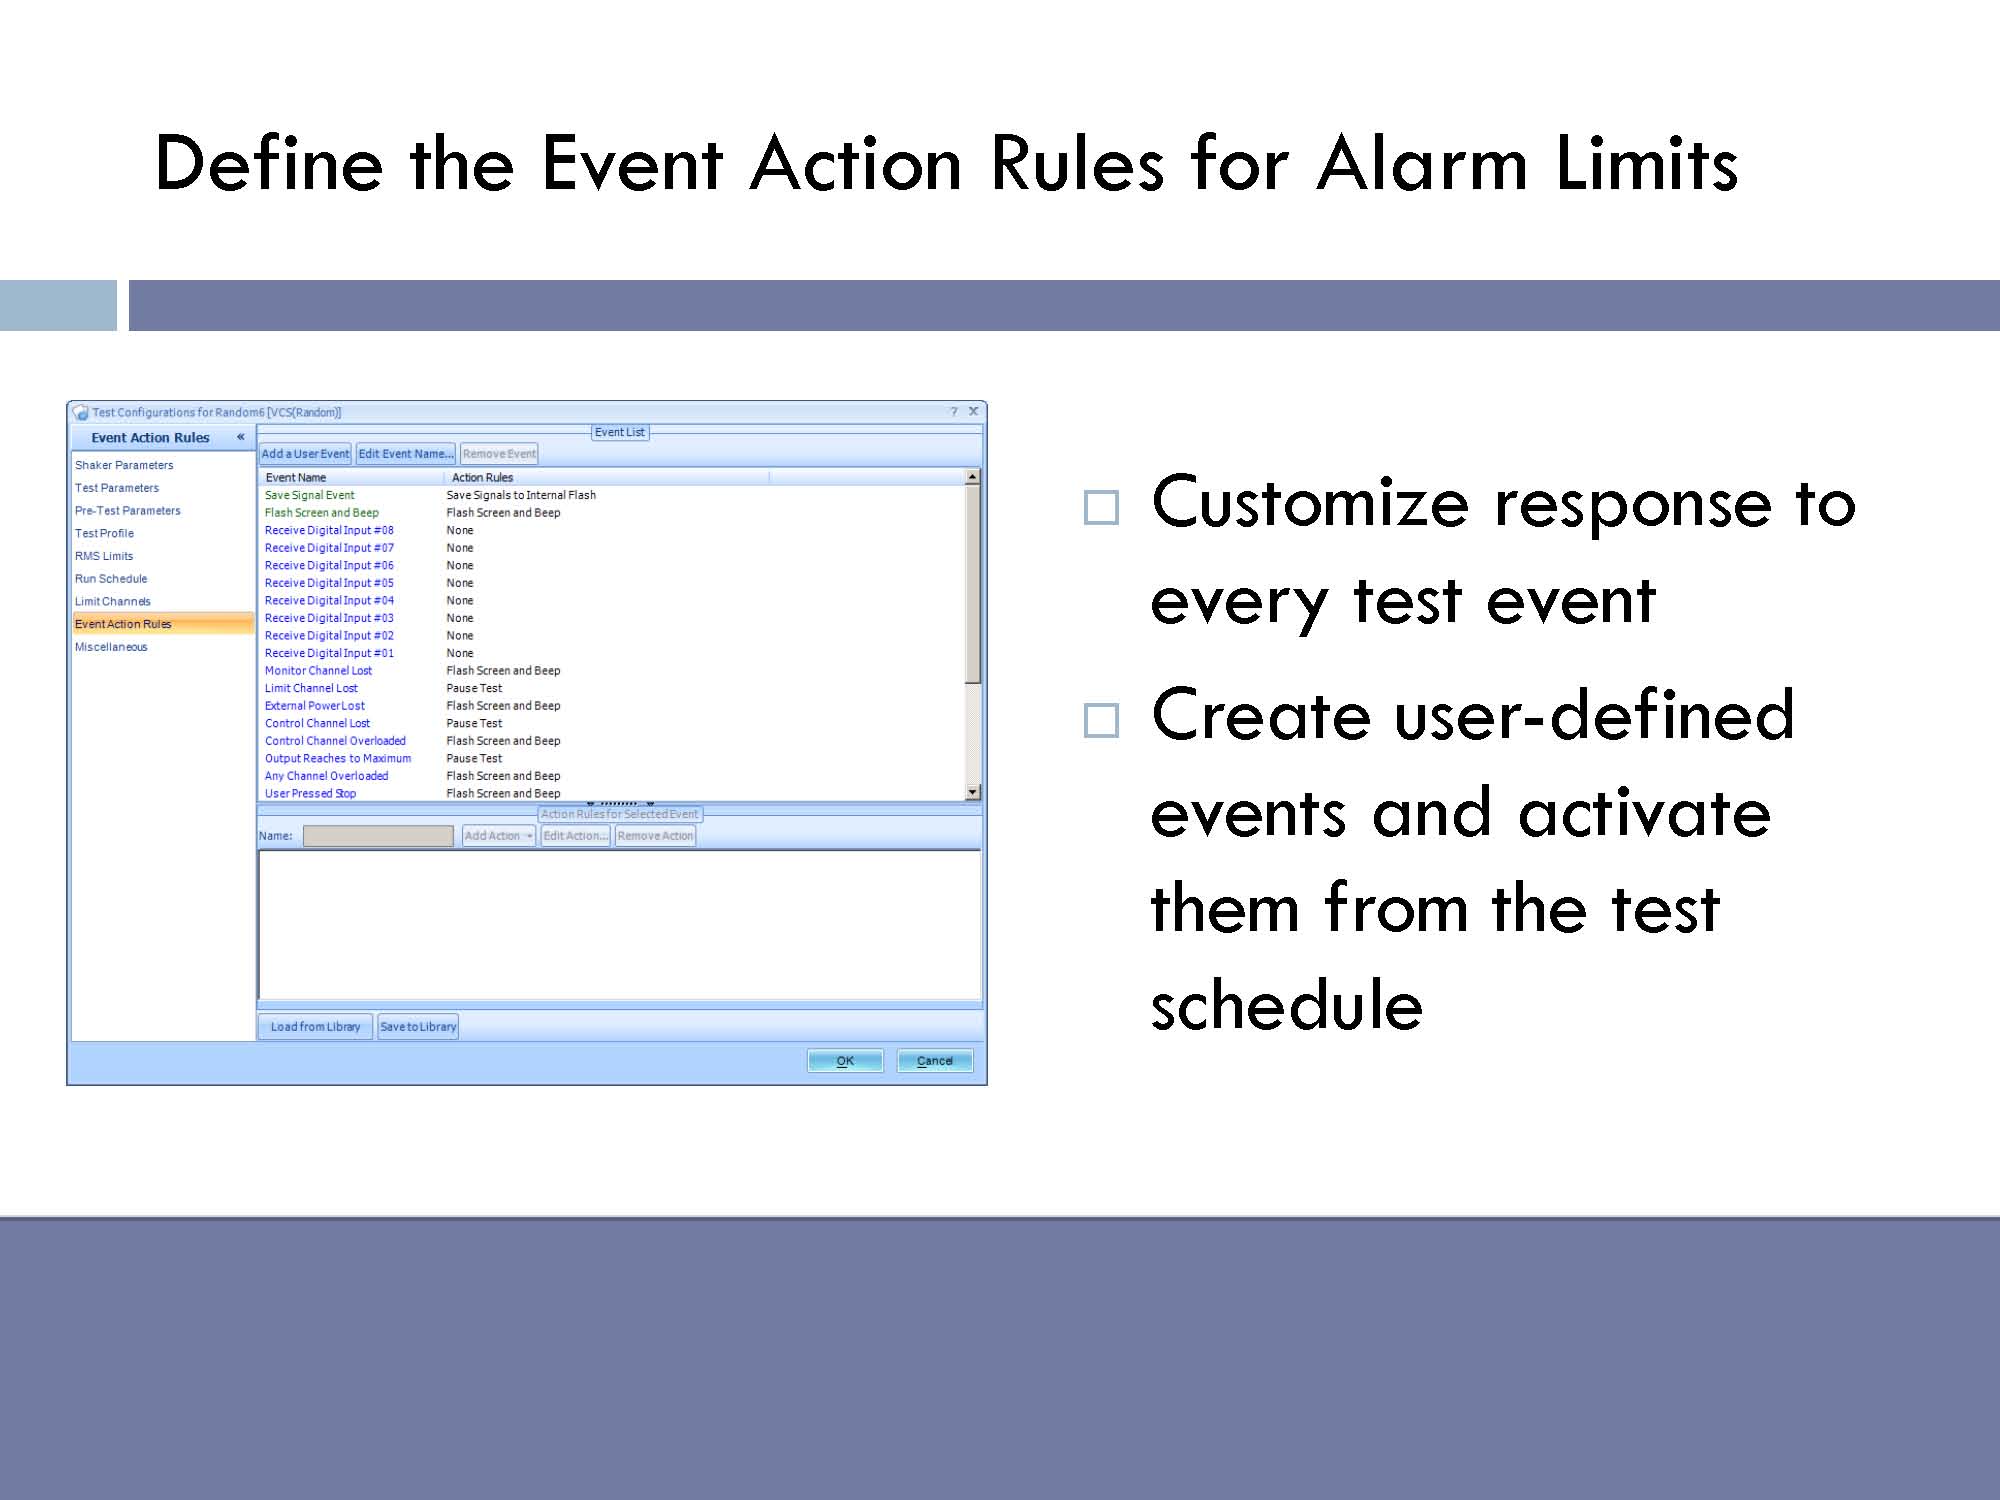   Define the event action rules for alarm limits. Customize response to every test event. Create user-defined events and activate them from the test schedule.  